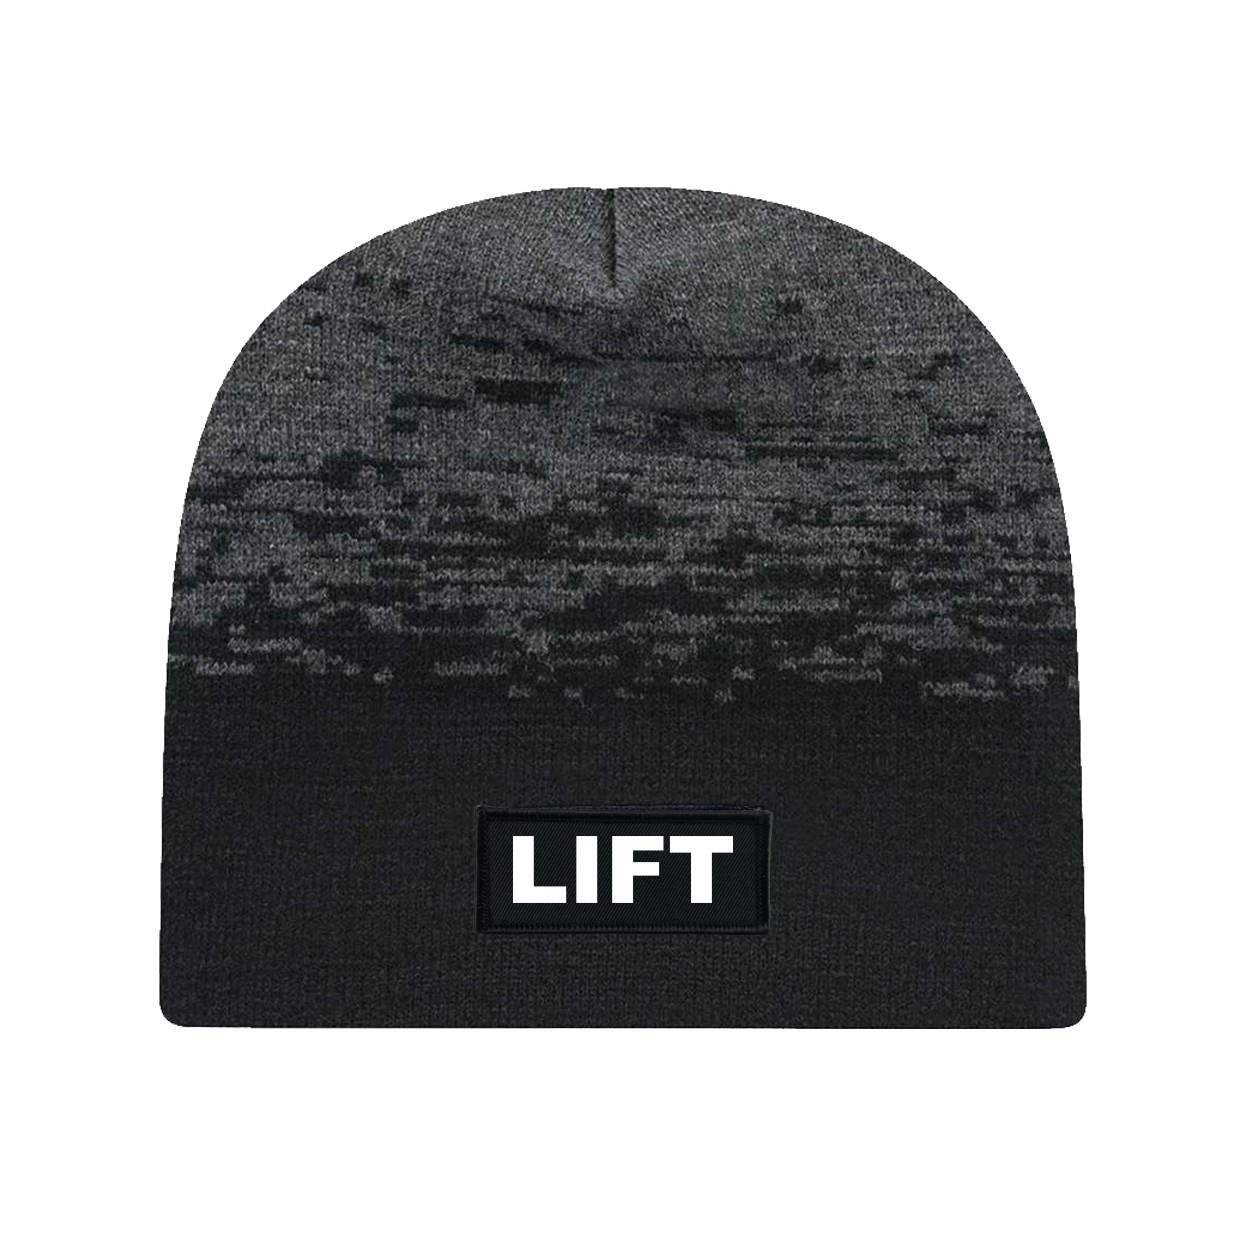 Lift Brand Logo Night Out Woven Patch Static Skully Beanie Black/ Dark Heather Grey